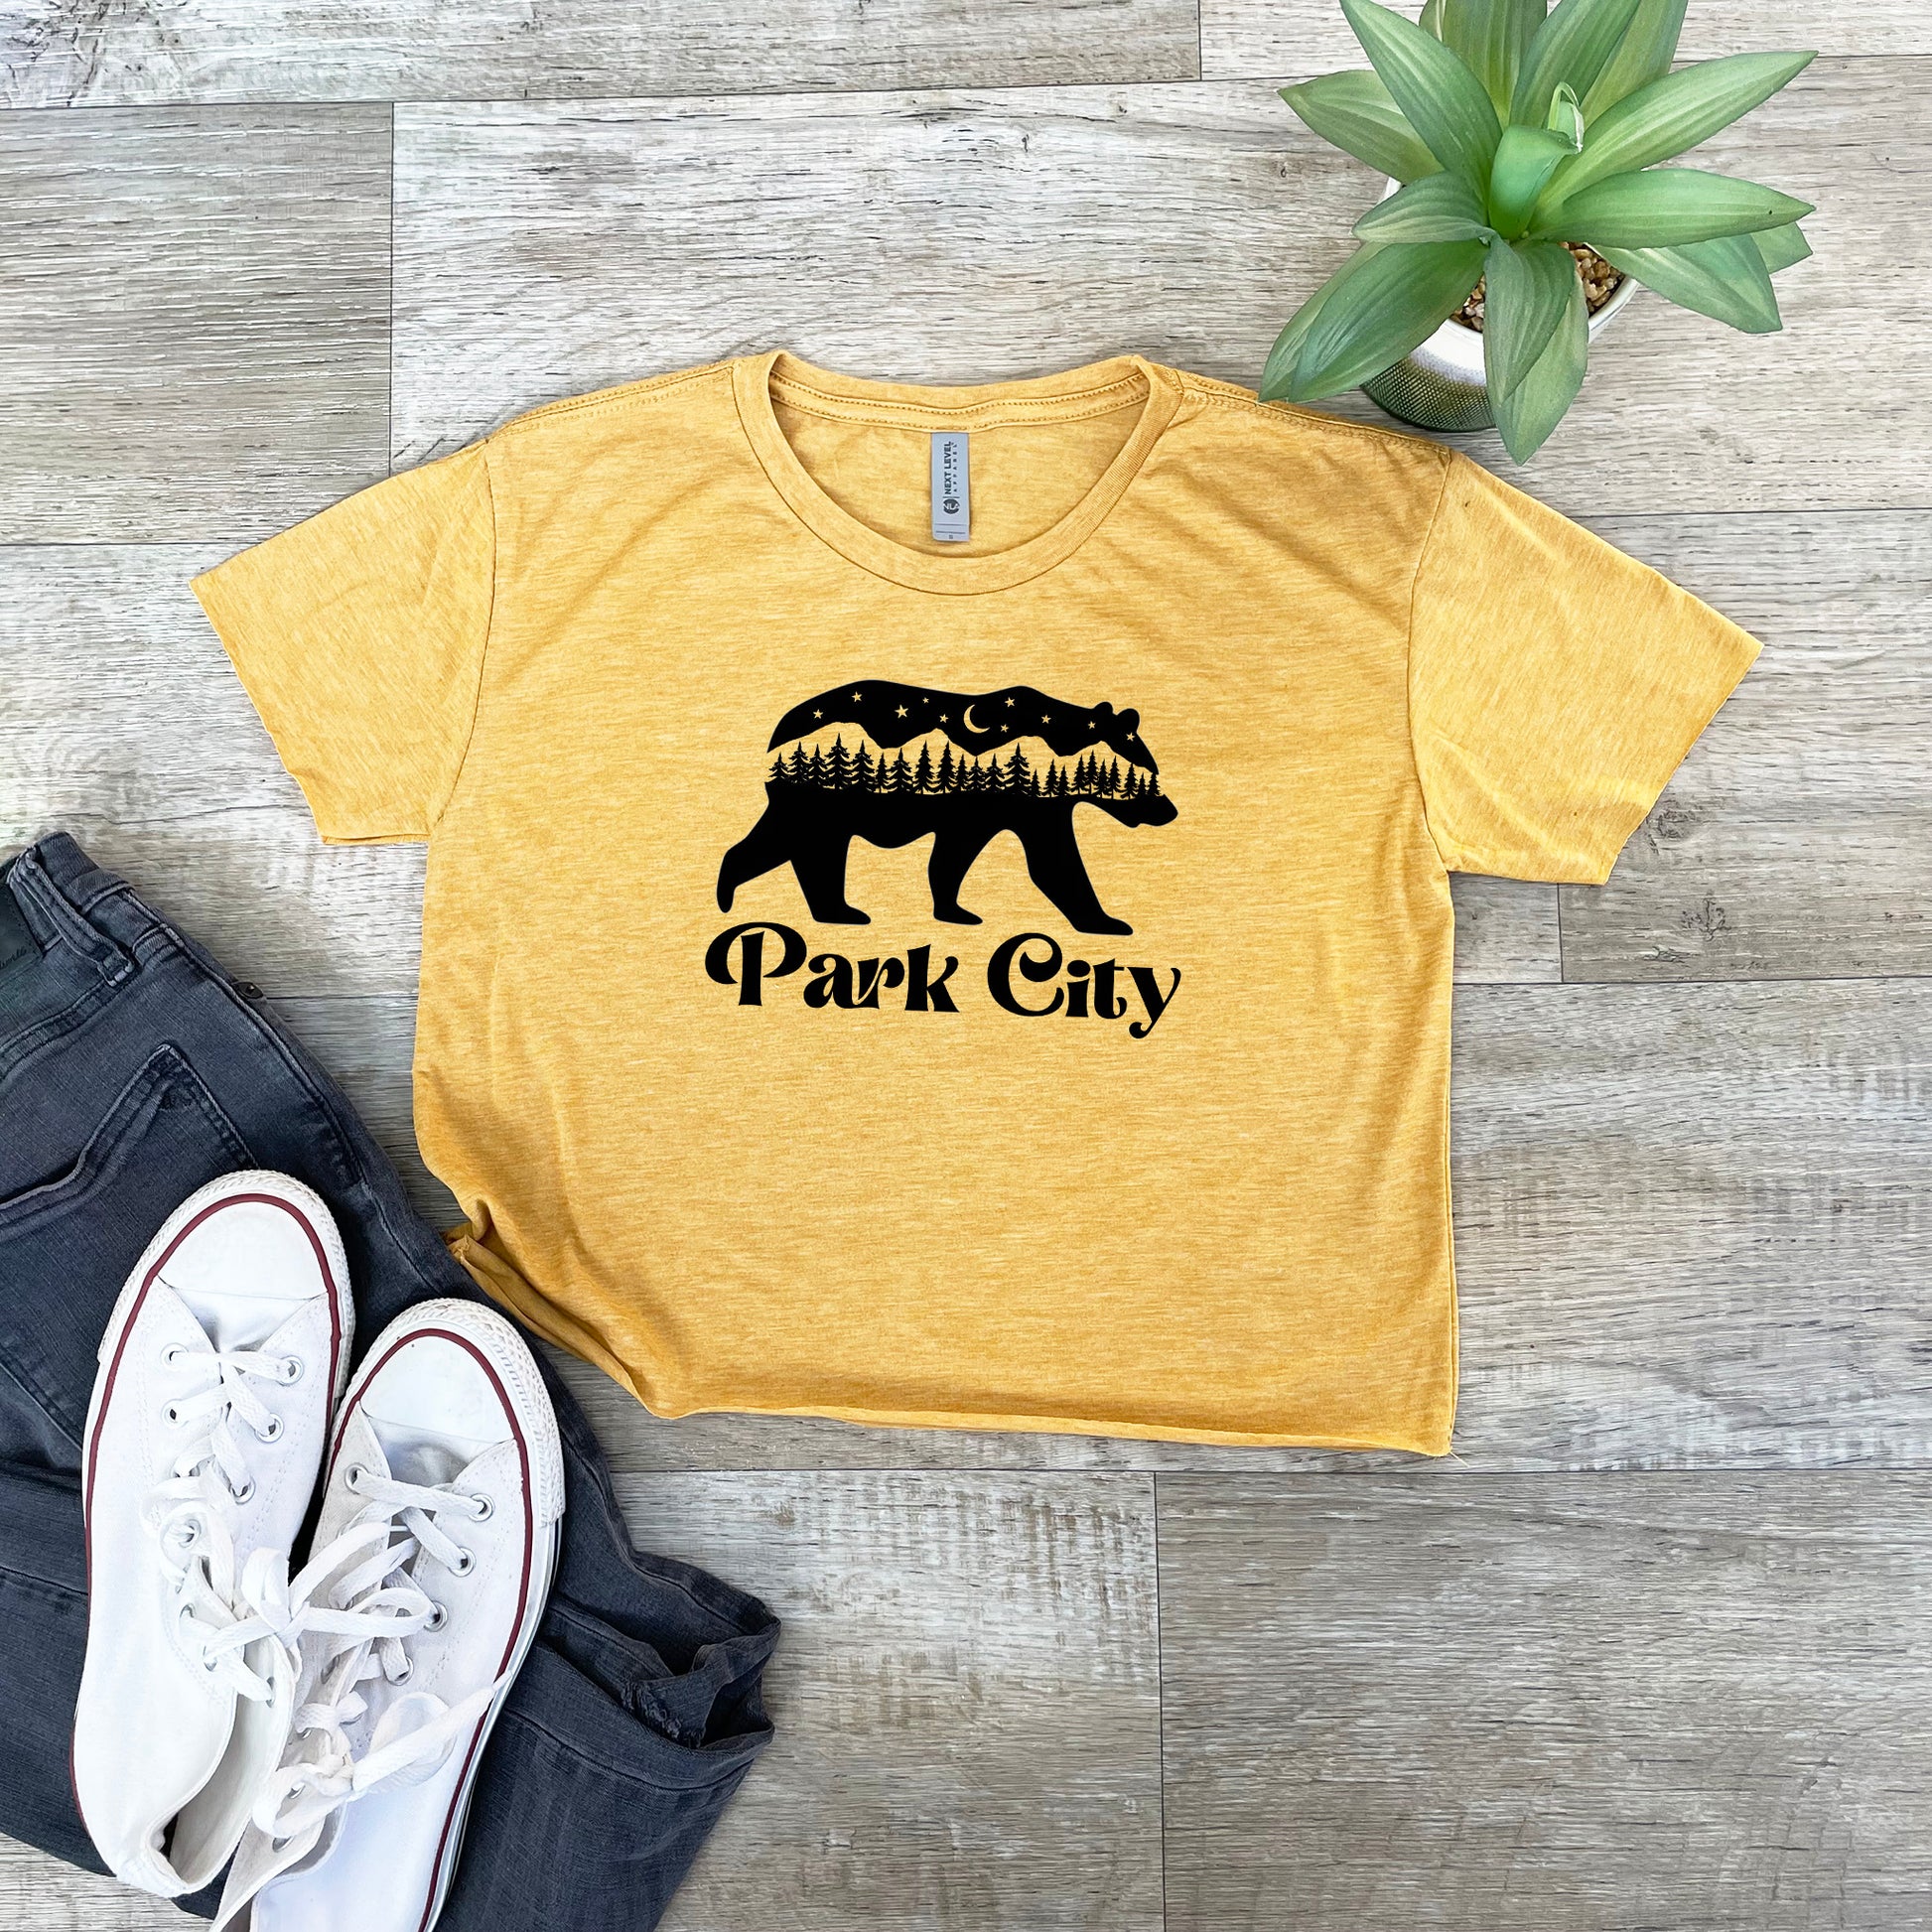 a t - shirt that says park city with a bear on it